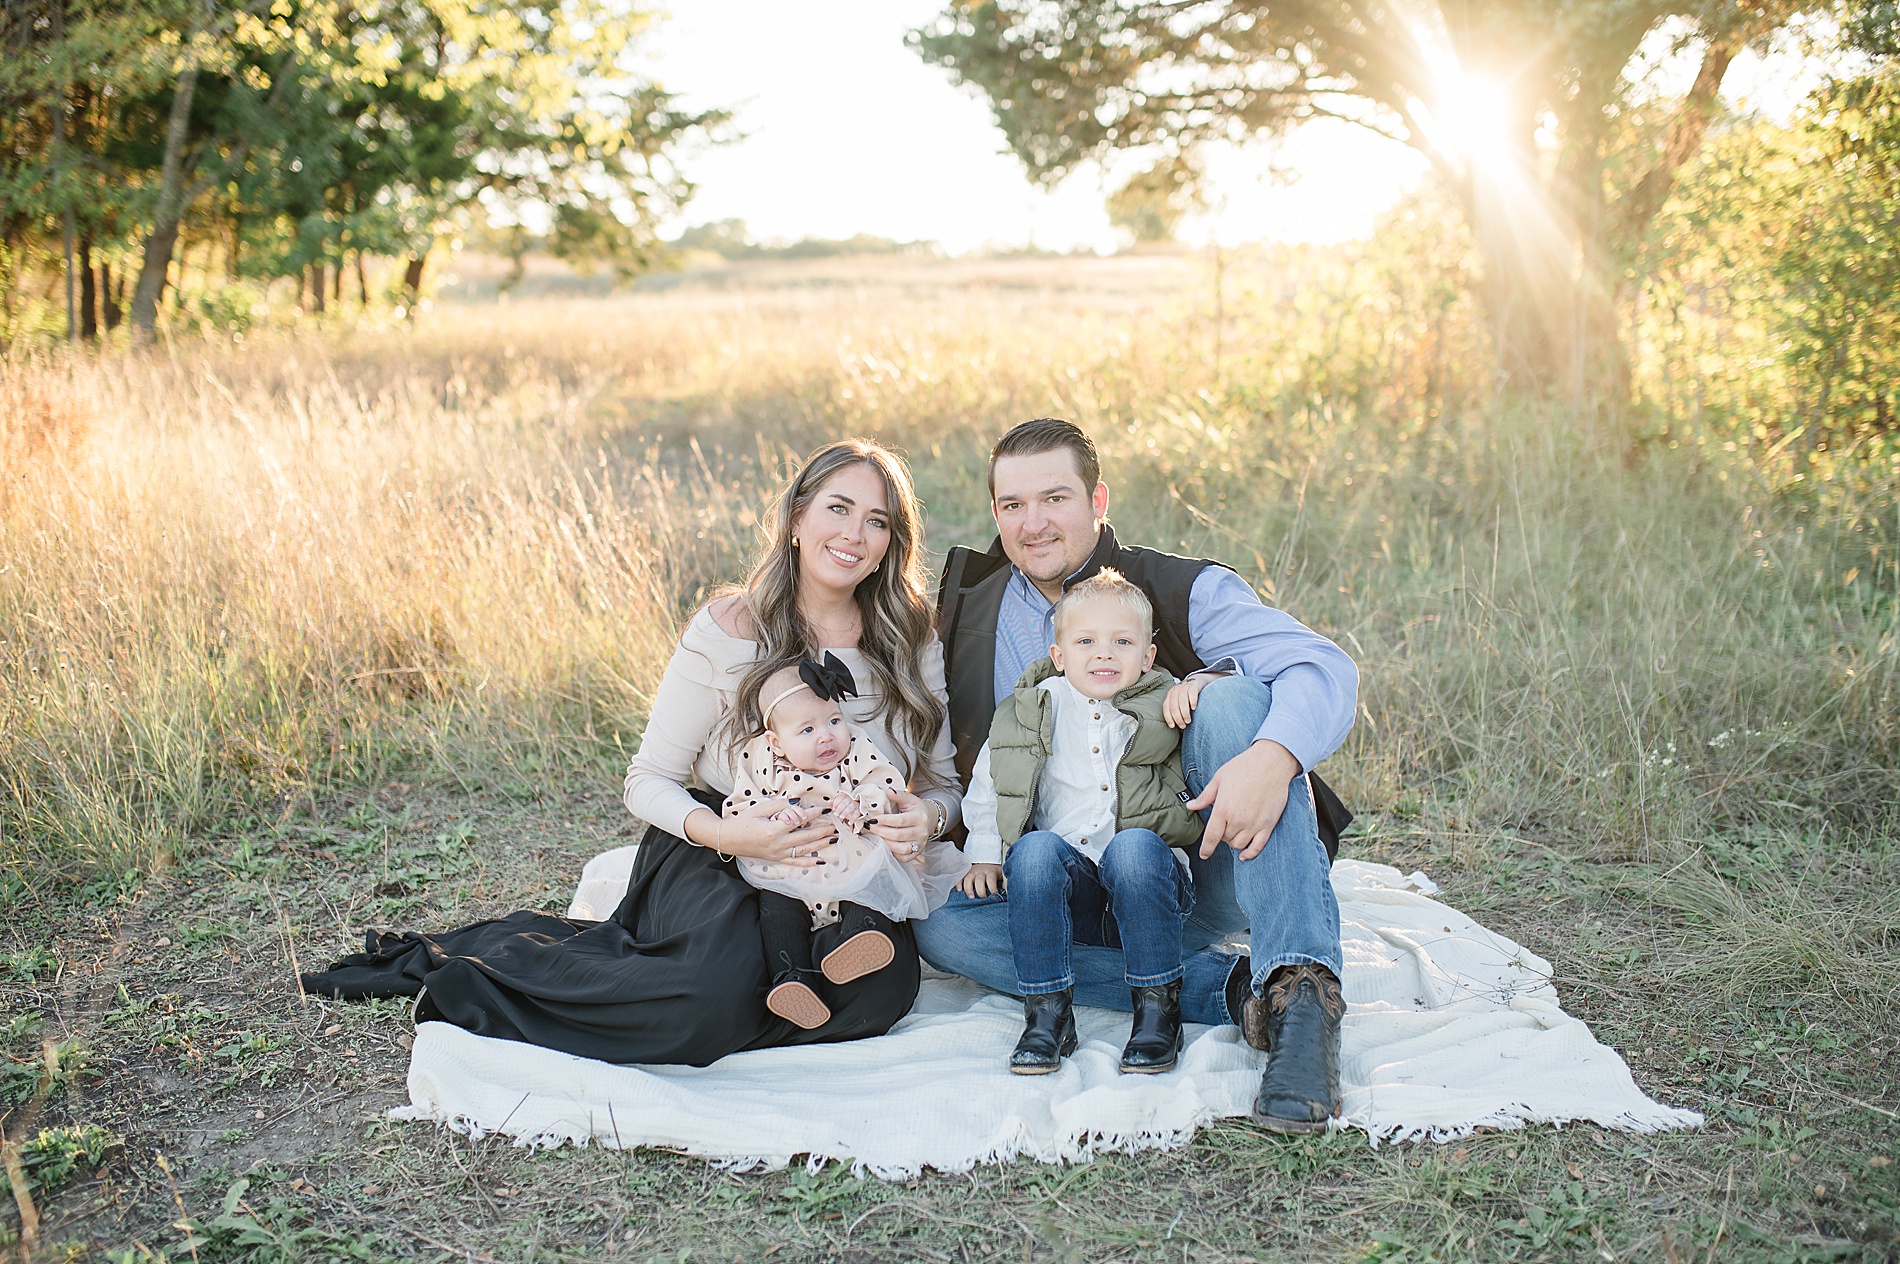 Family of four at Erwin Park | Top 11 Dallas-Fort Worth Picture Locations photographed by Lindsey Dutton Photography, a Dallas Family photographer
